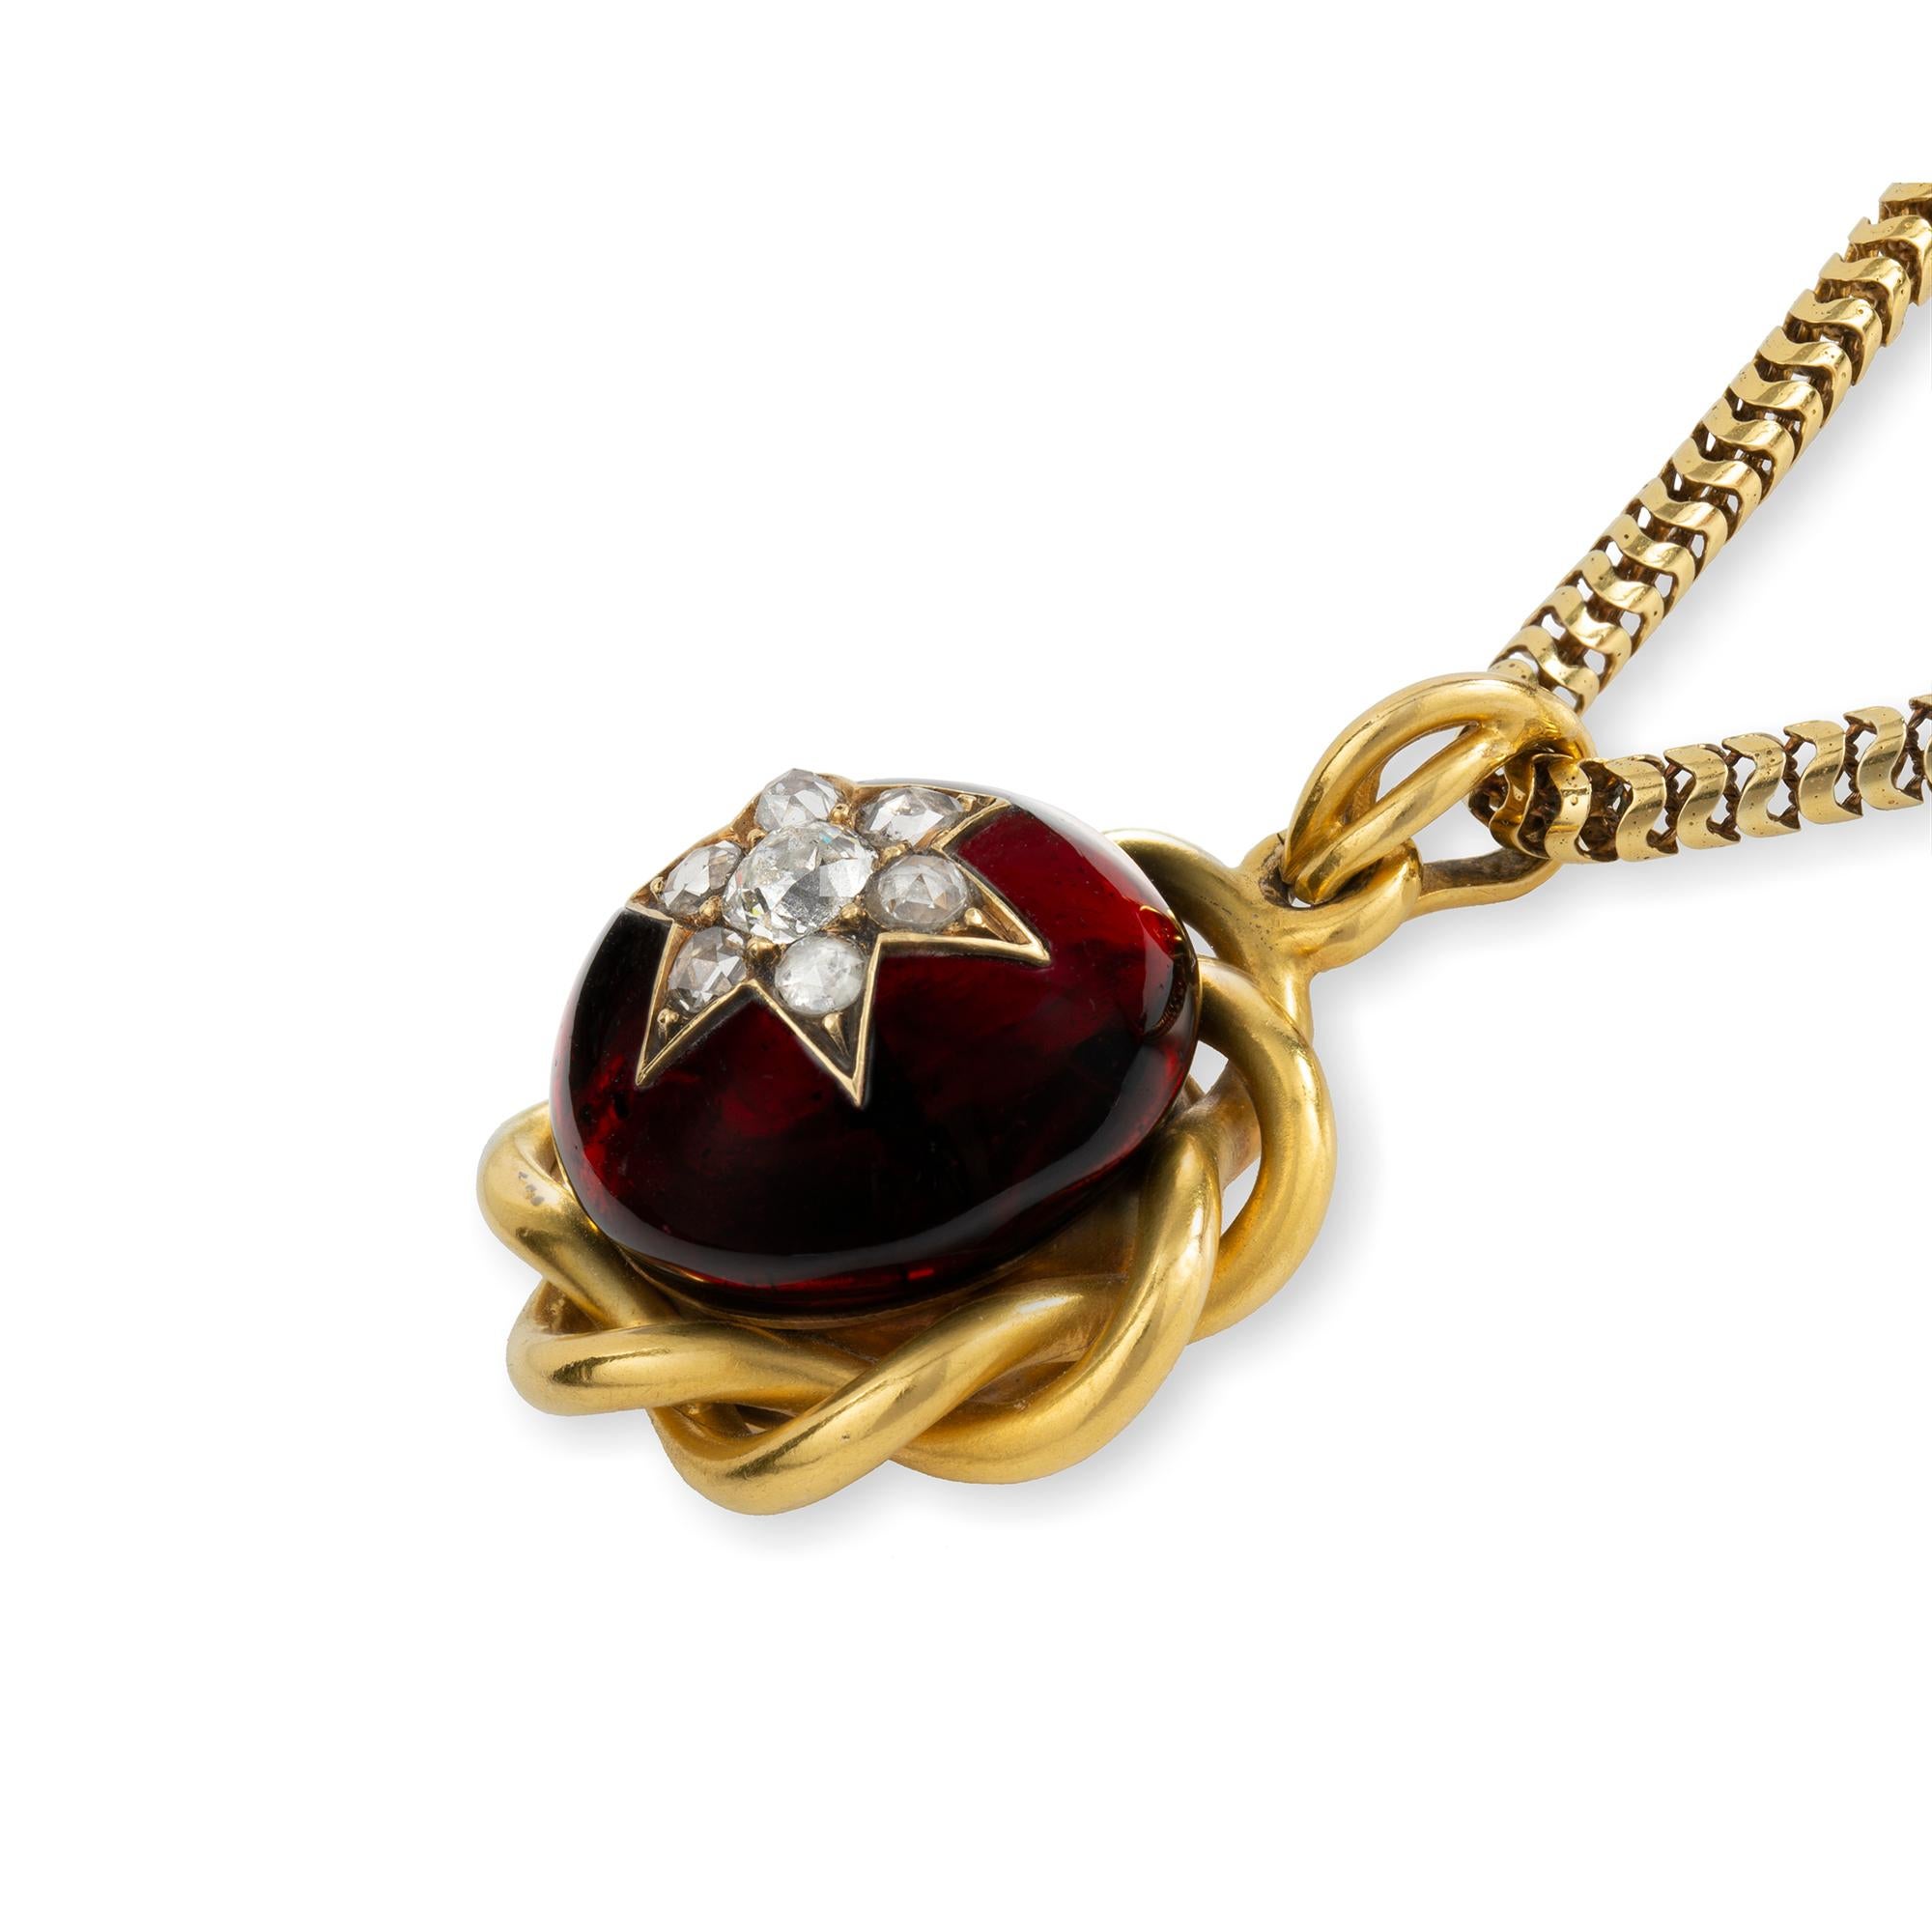 A Victorian garnet and diamond pendant, the old brilliant-cut diamond set star to the centre of a round cabochon-cut garnet, within a frame of entwined gold surmounted from a twisted wire pendant loop, the pendant measuring approximately 3.8 x